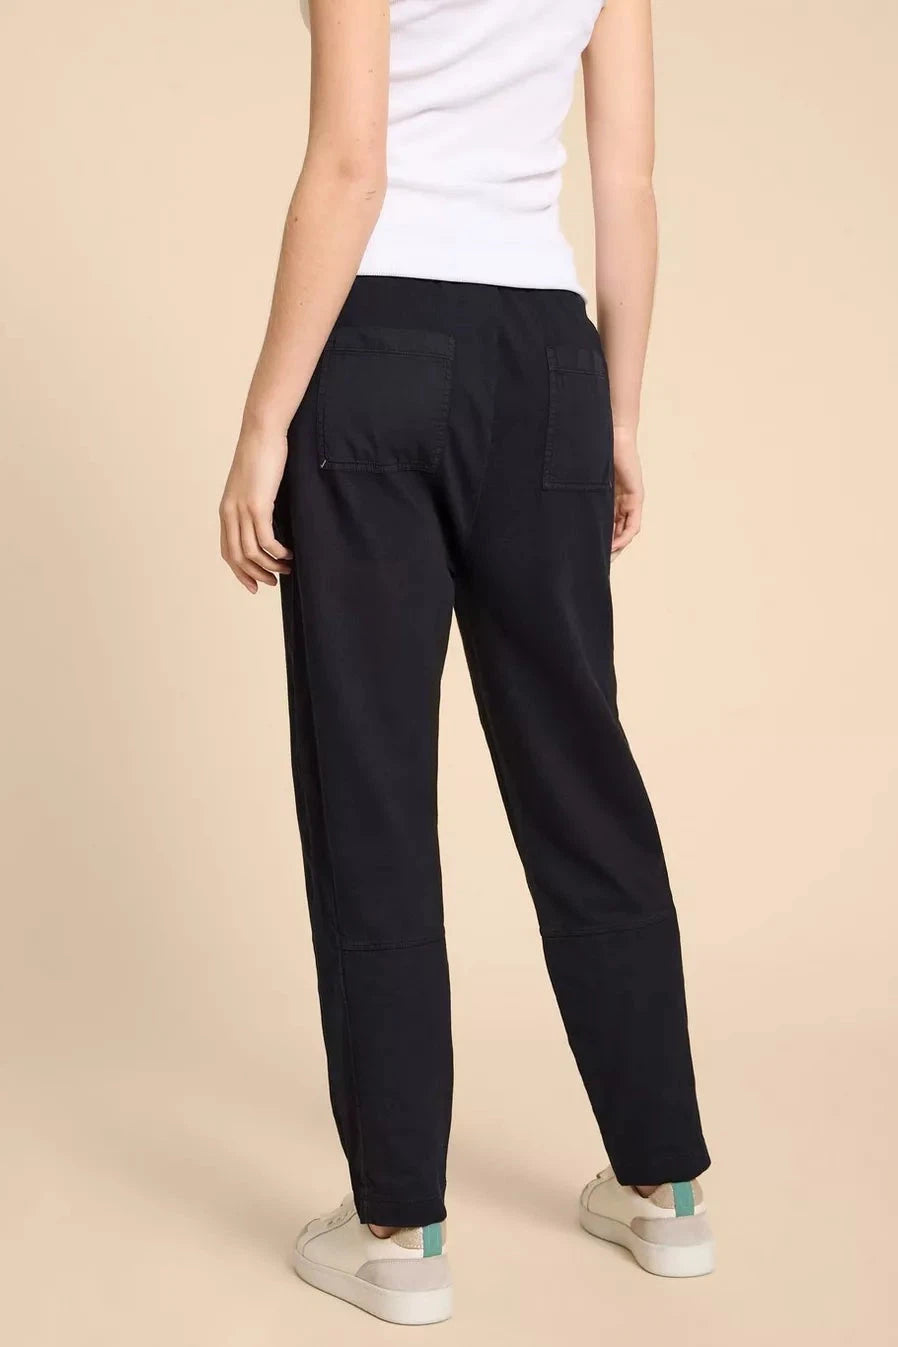 White Stuff Ava Jersey Jogger in Pure Black-Womens-Ohh! By Gum - Shop Sustainable